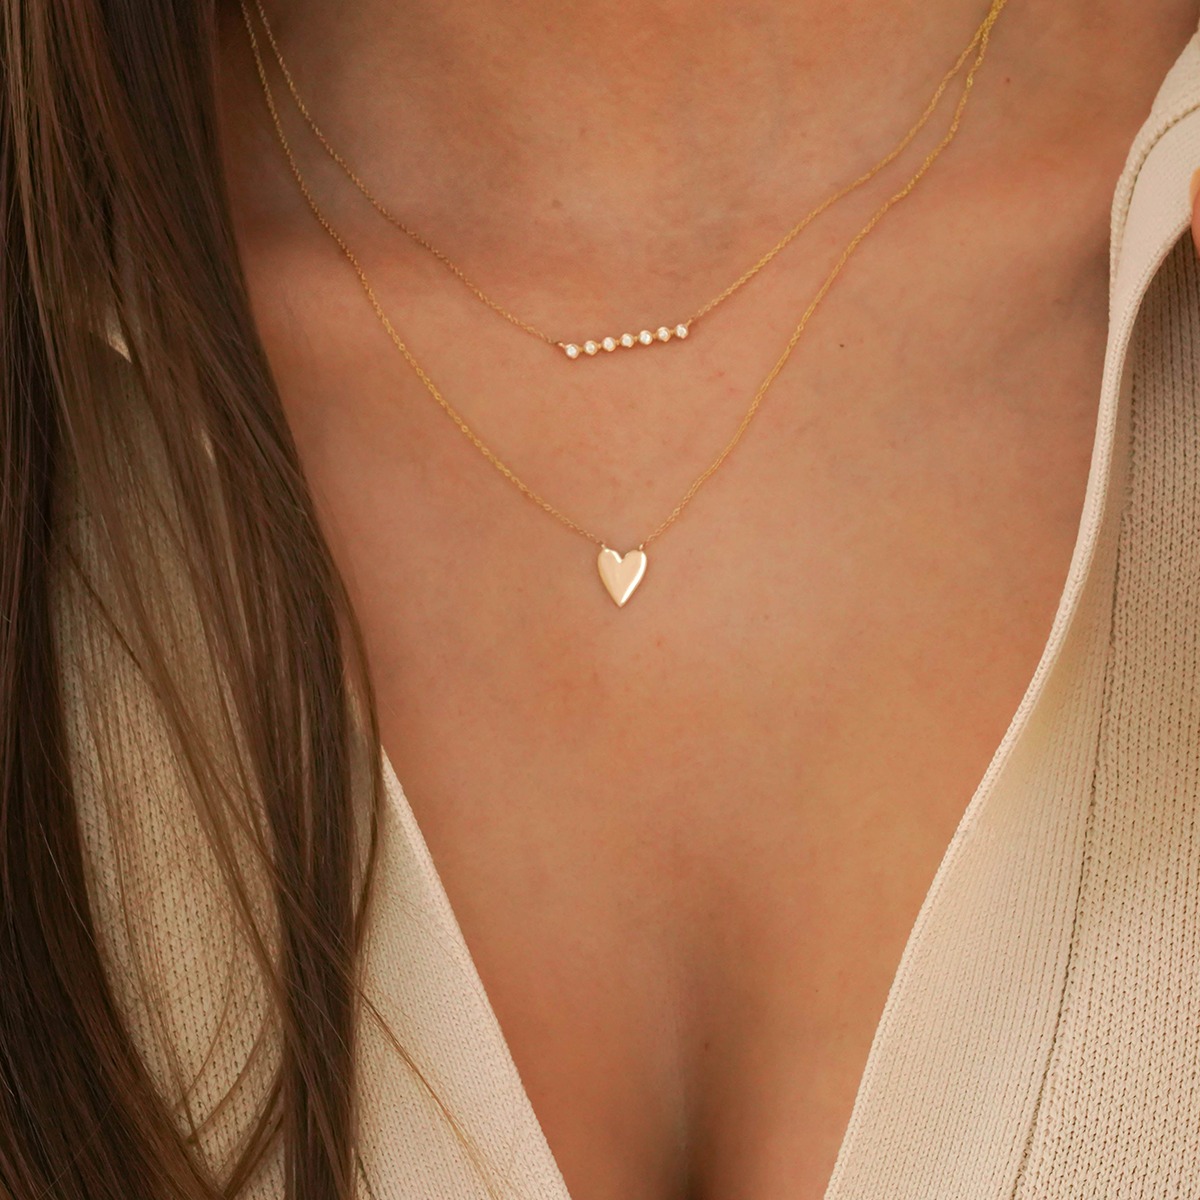 delicate necklace for the perfect bridesmaid gift